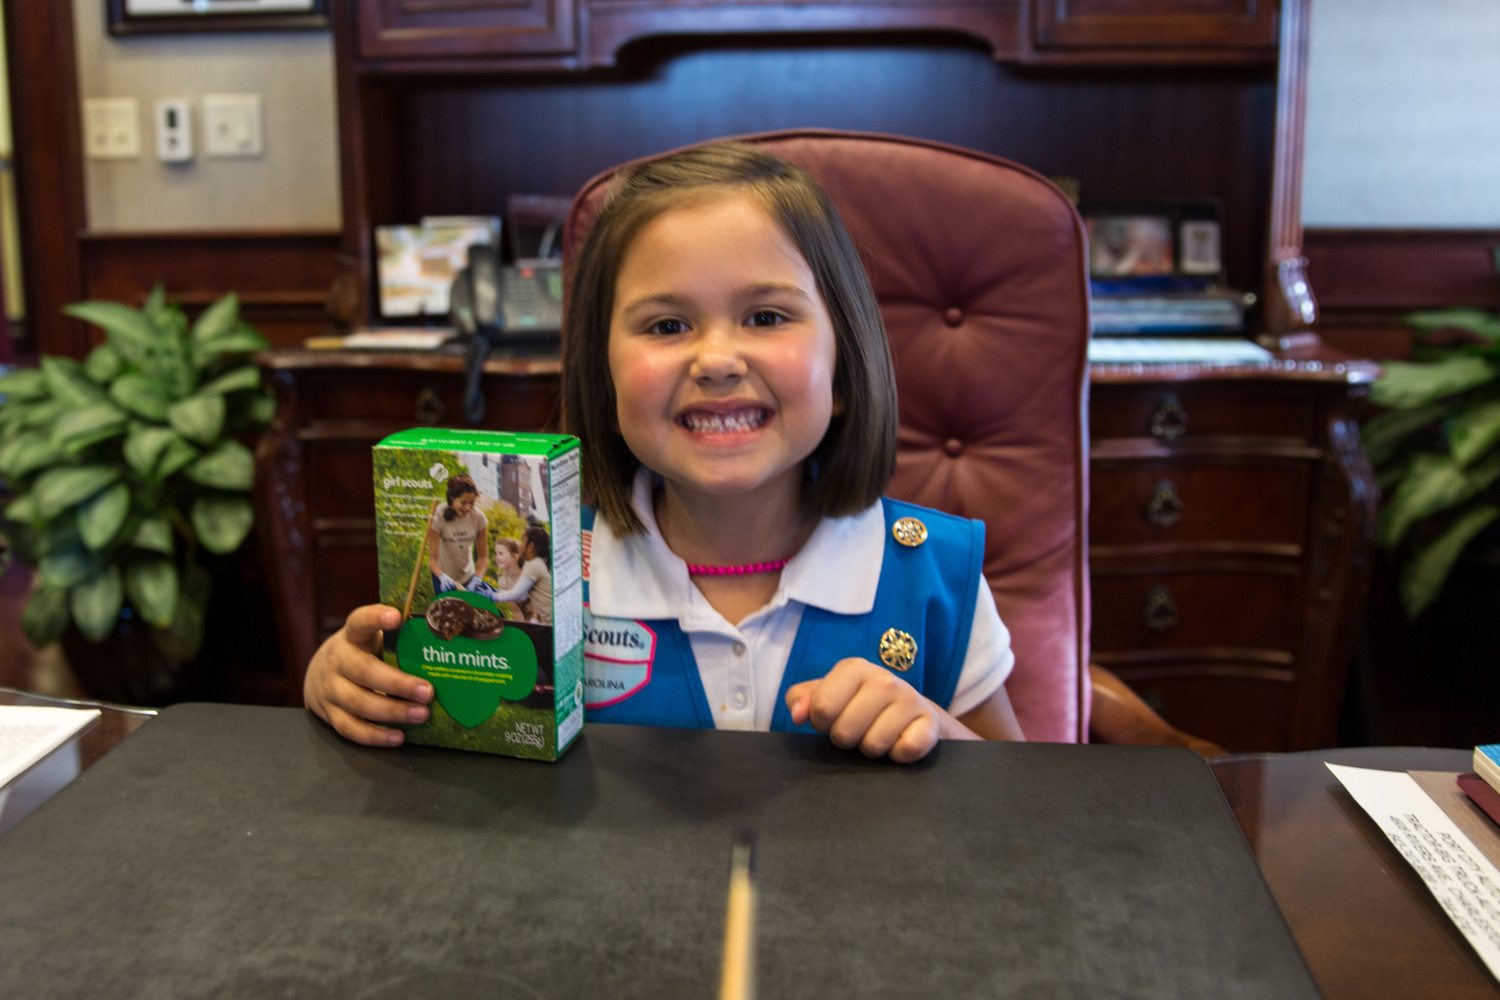 Girl Scouts visit Mayor Summey for Girl Scouts Week